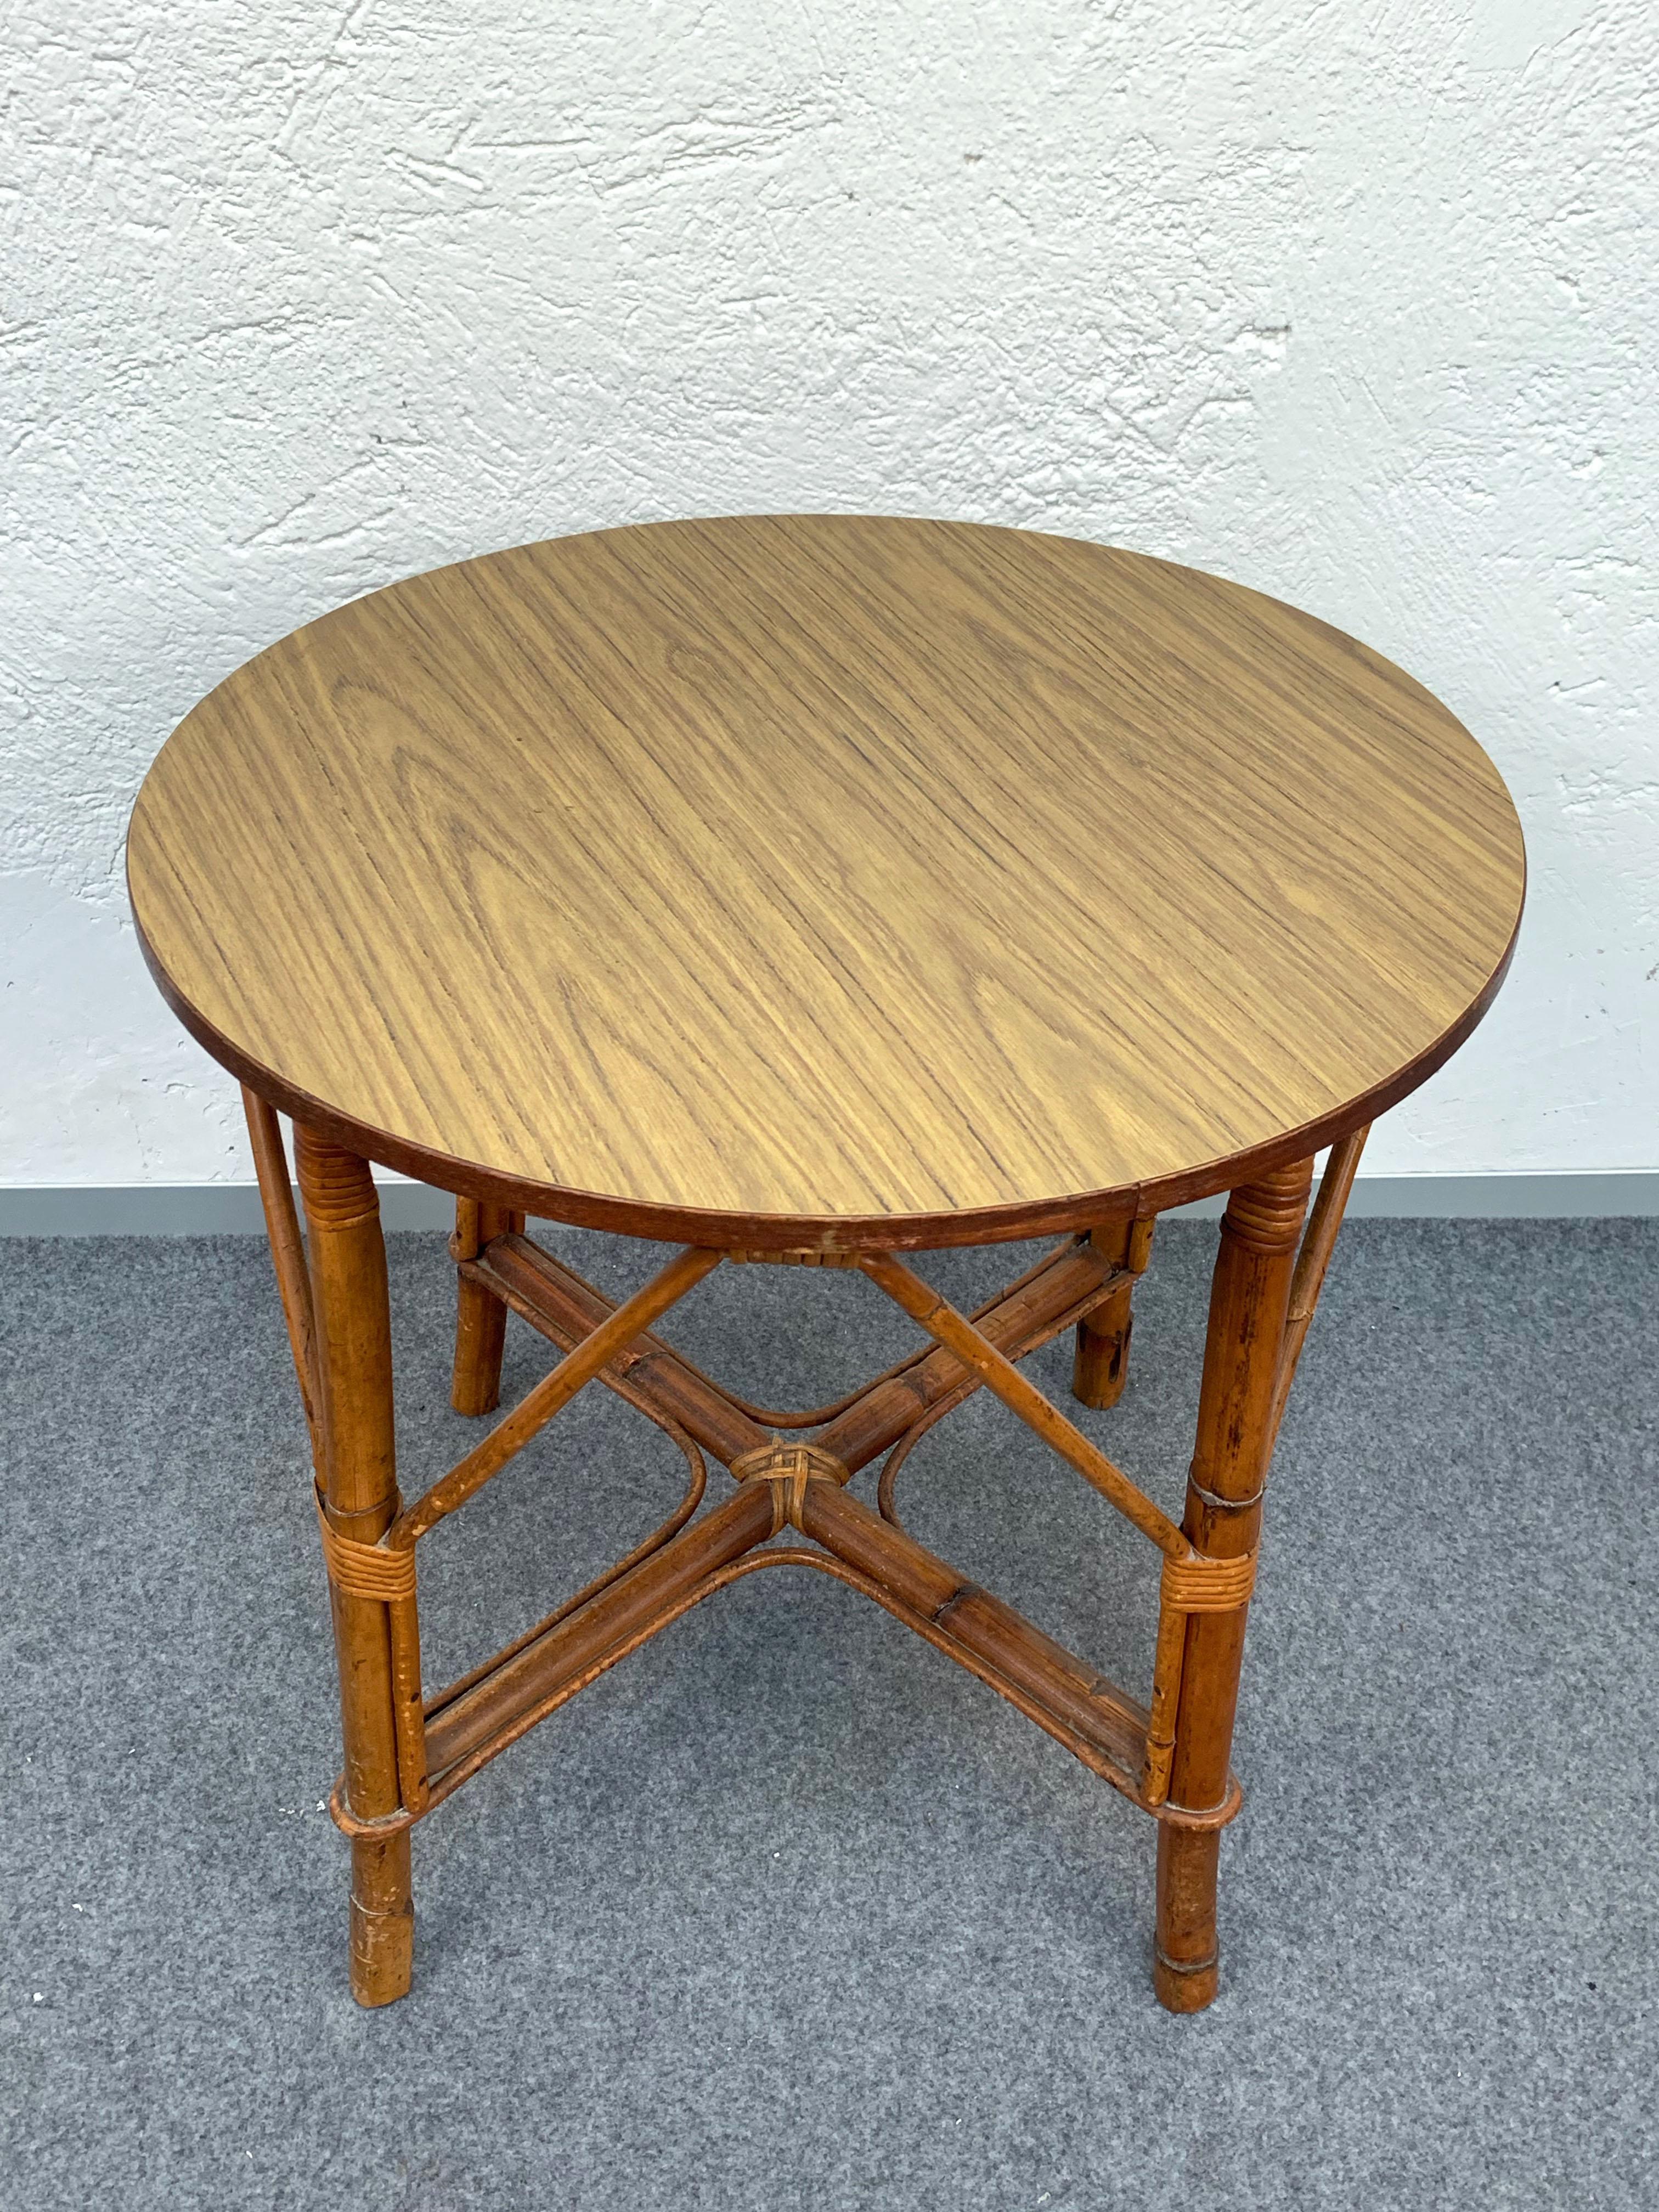 Round Midcentury Bamboo Rattan Italian Coffee Table with Laminated Top, 1960s For Sale 2